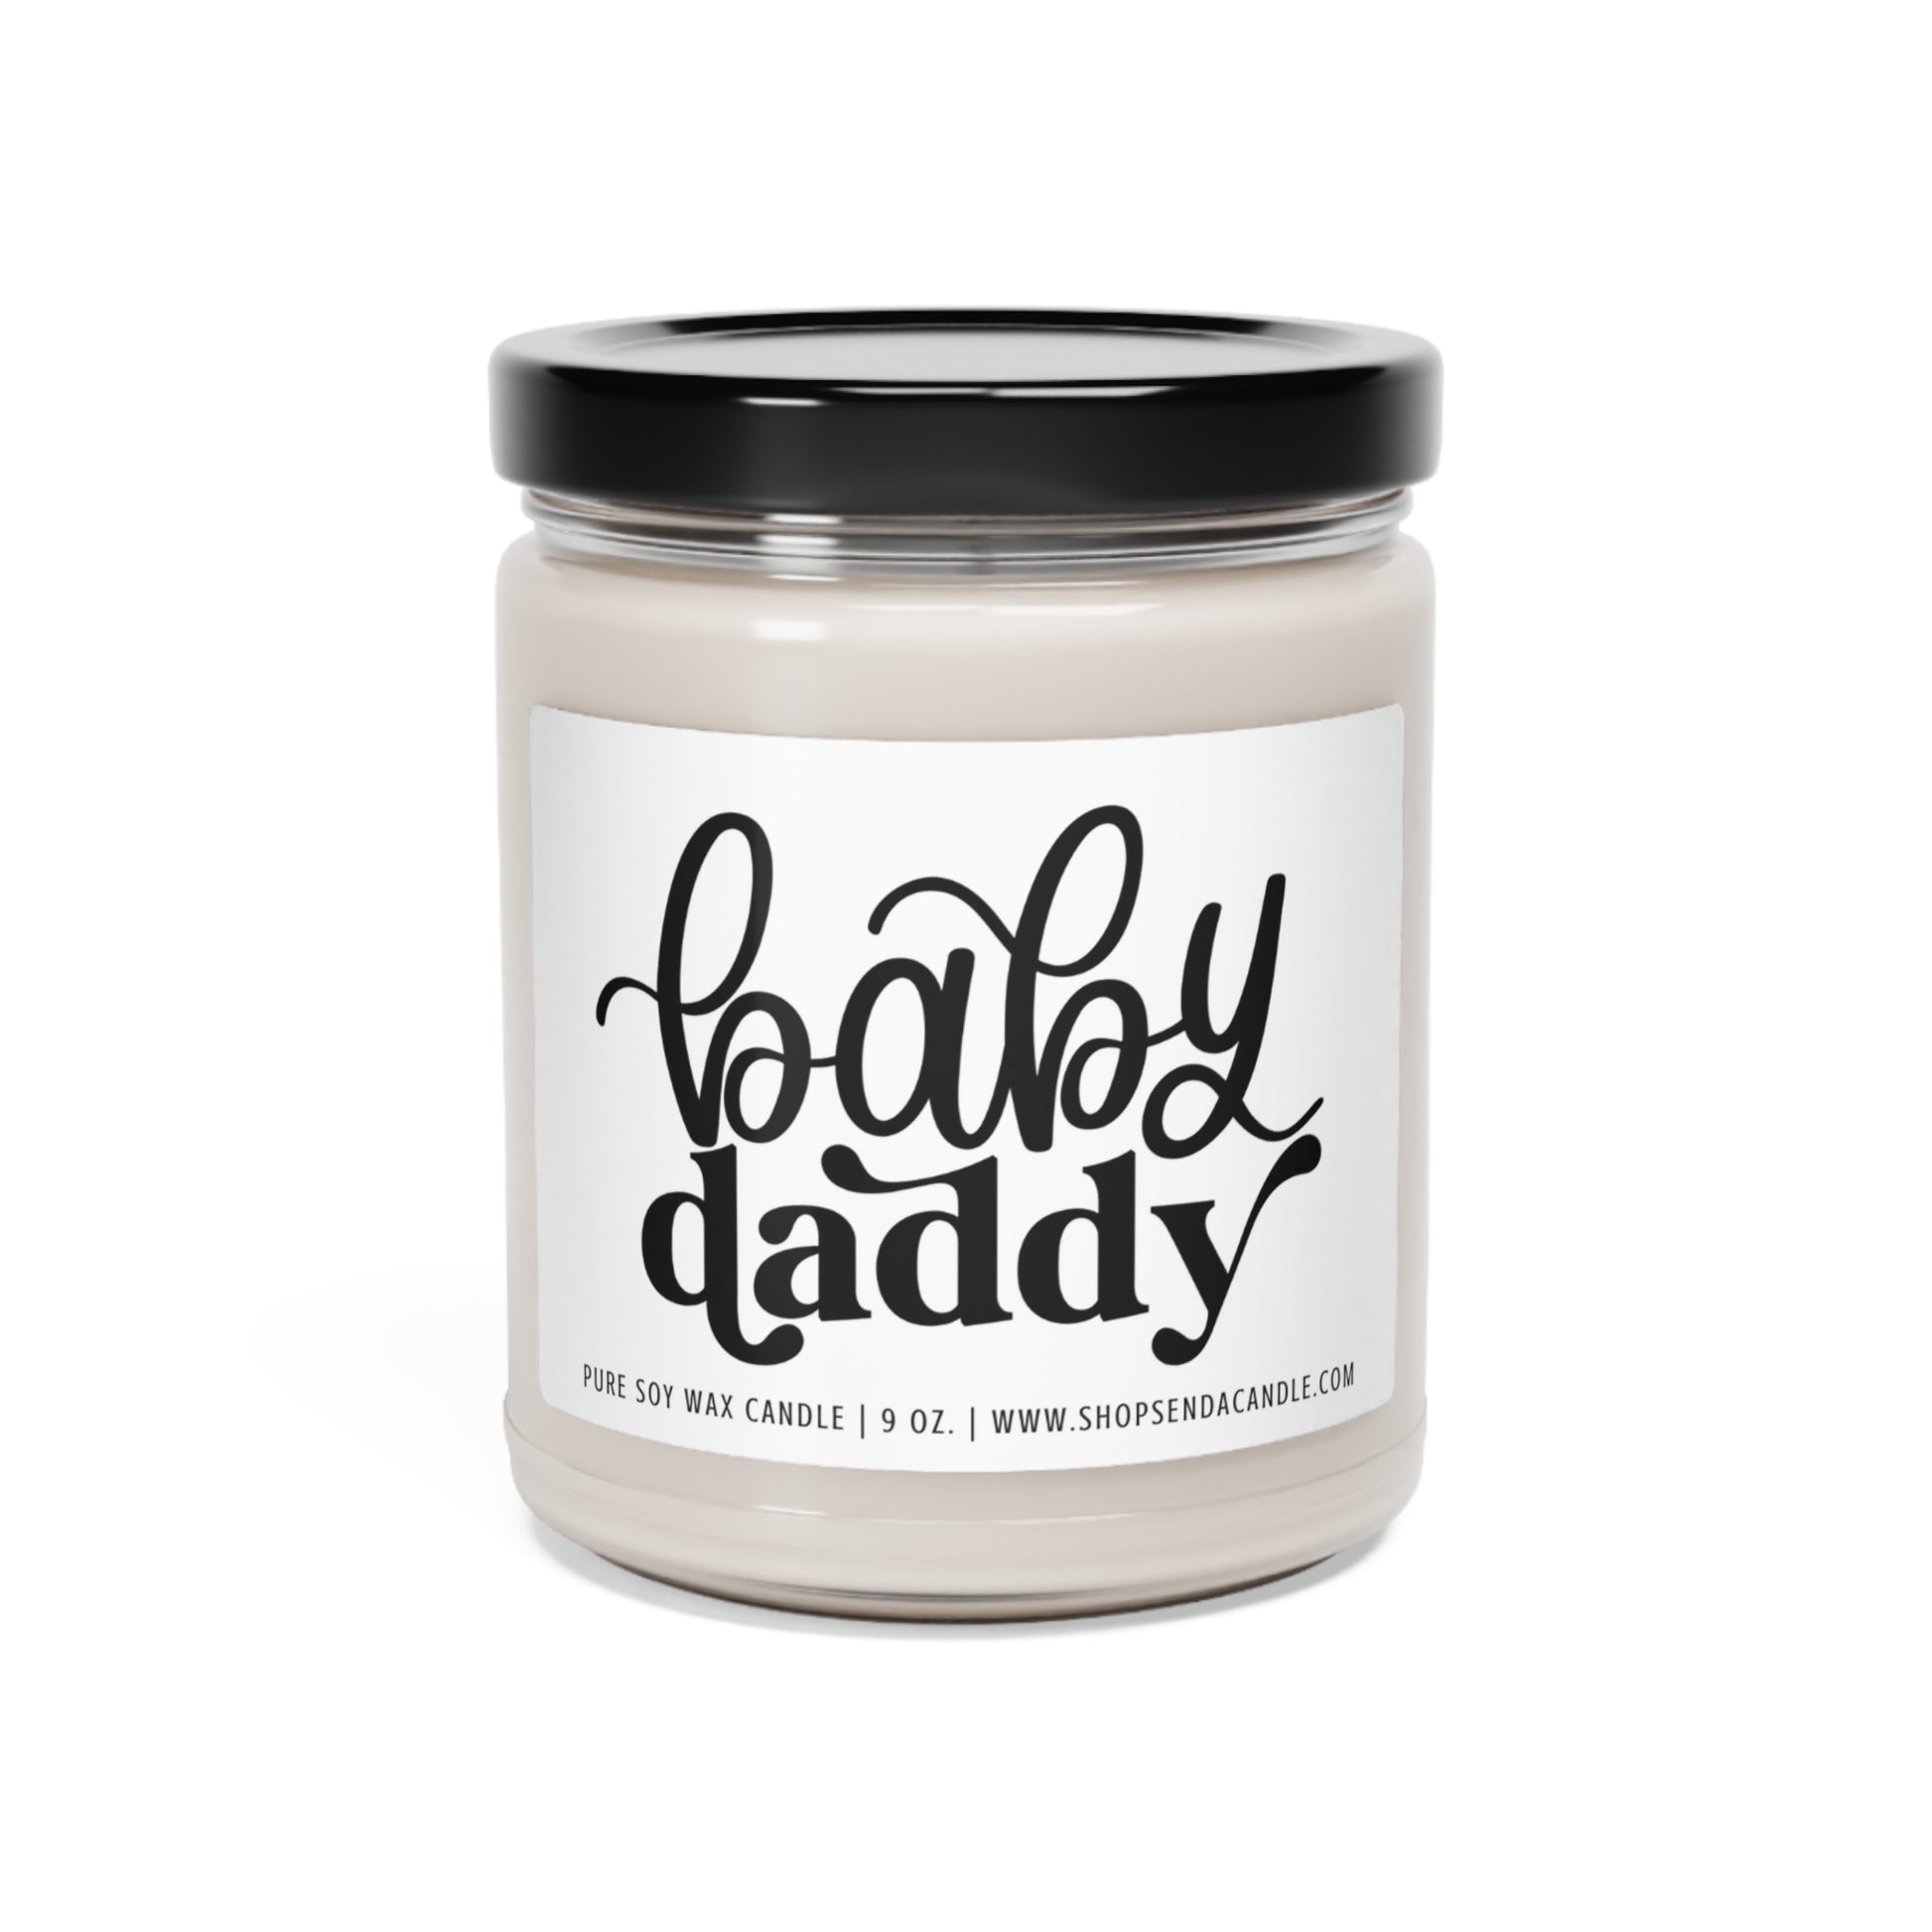 Daddy Pregnancy Announcement | Send A Candle